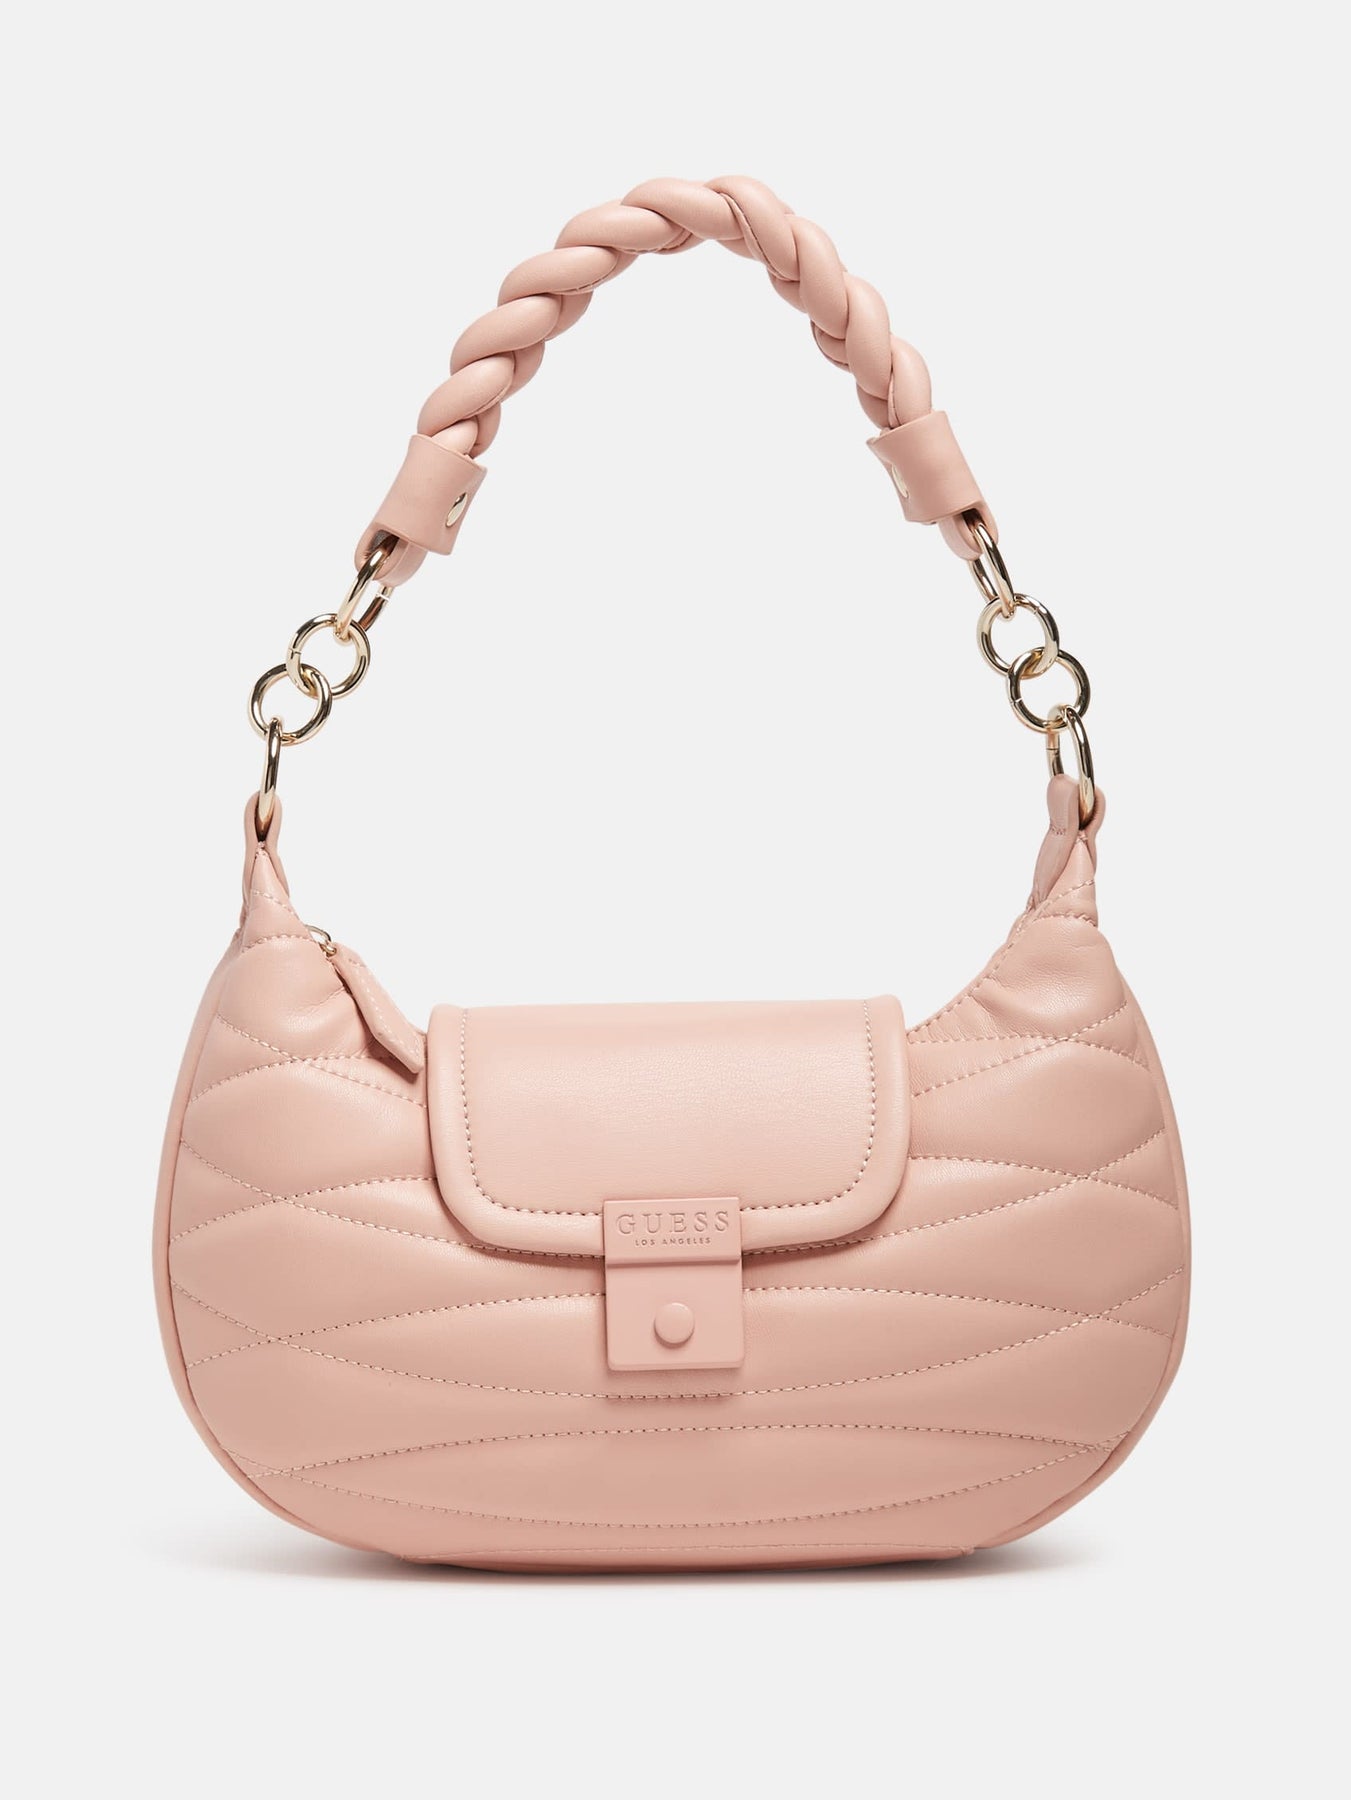 Thoughts on Guess bags and quality? : r/handbags